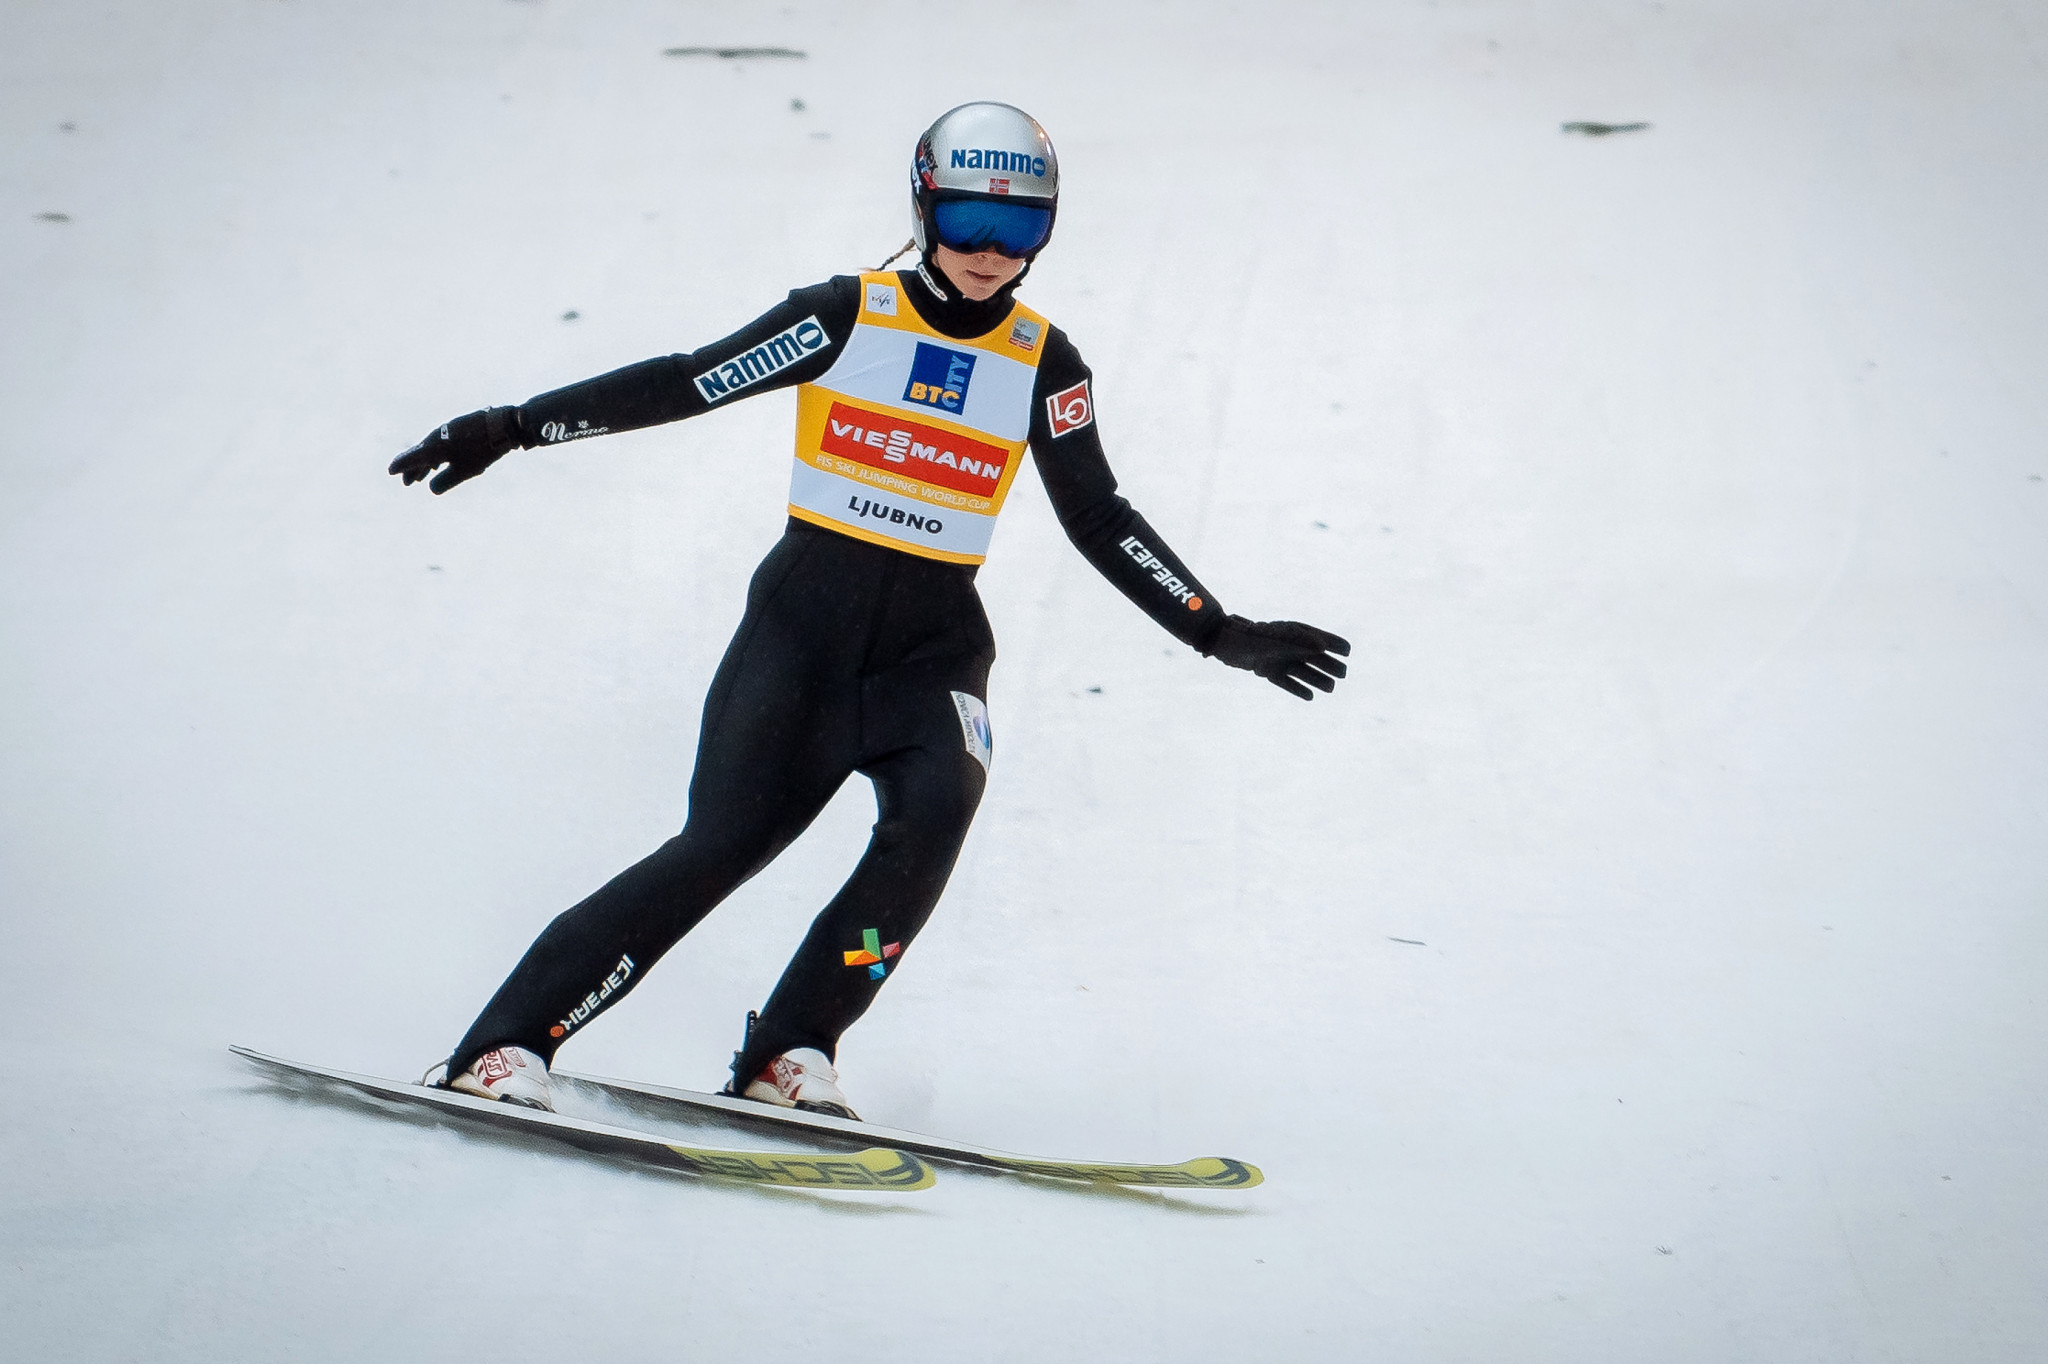 Lundby extends FIS Ski Jumping World Cup lead with success in Oberstdorf